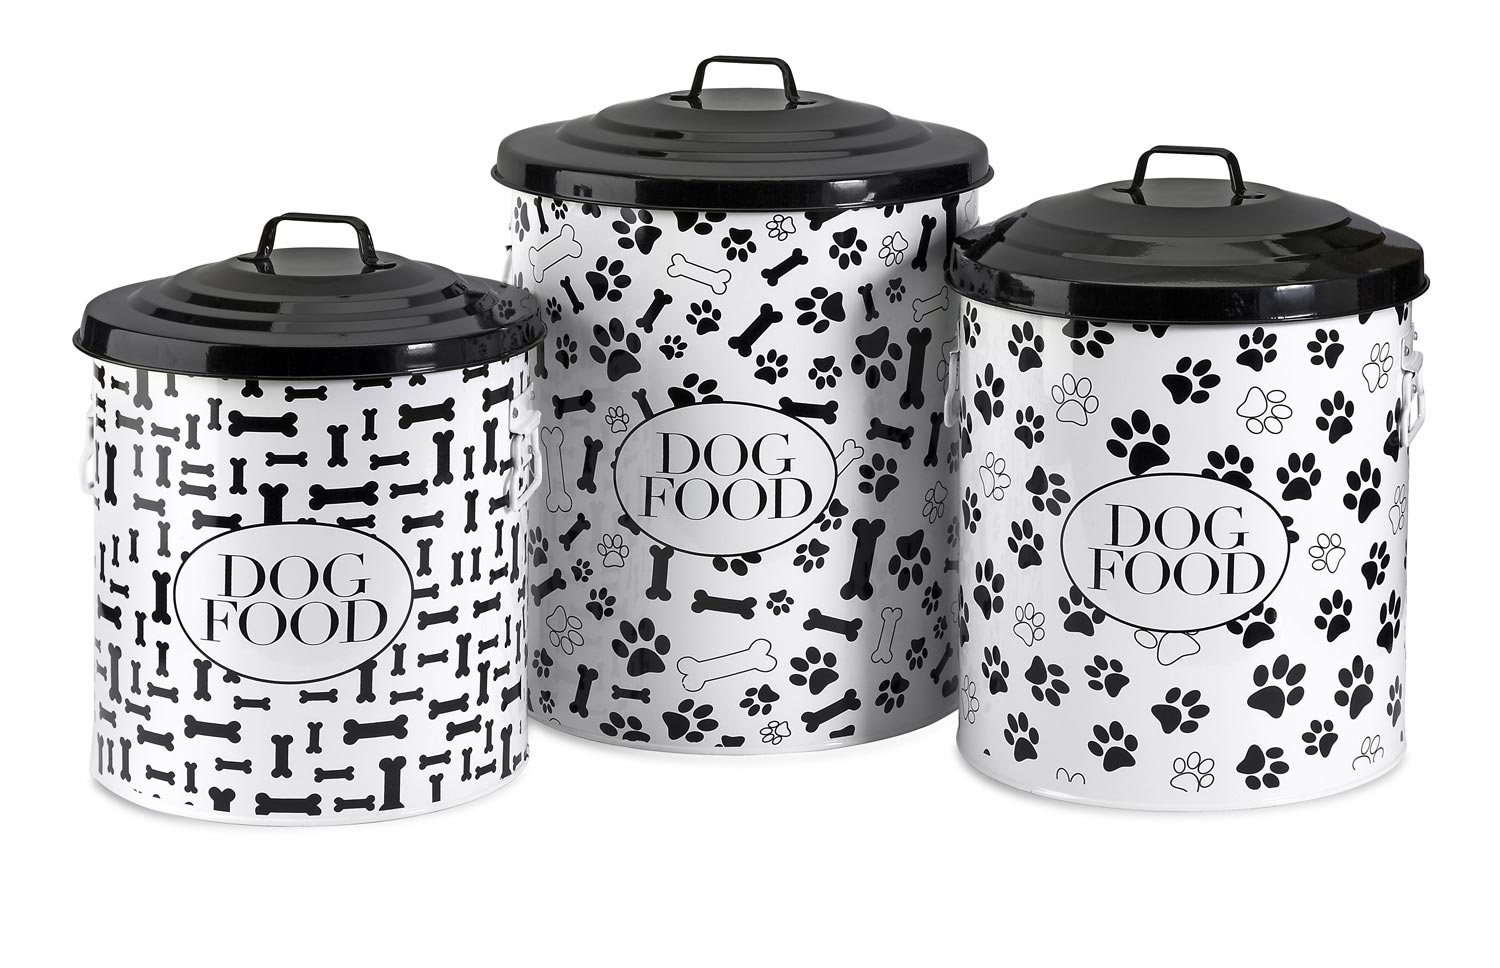 IMAX Dog Food Storage Canisters - Set of 3